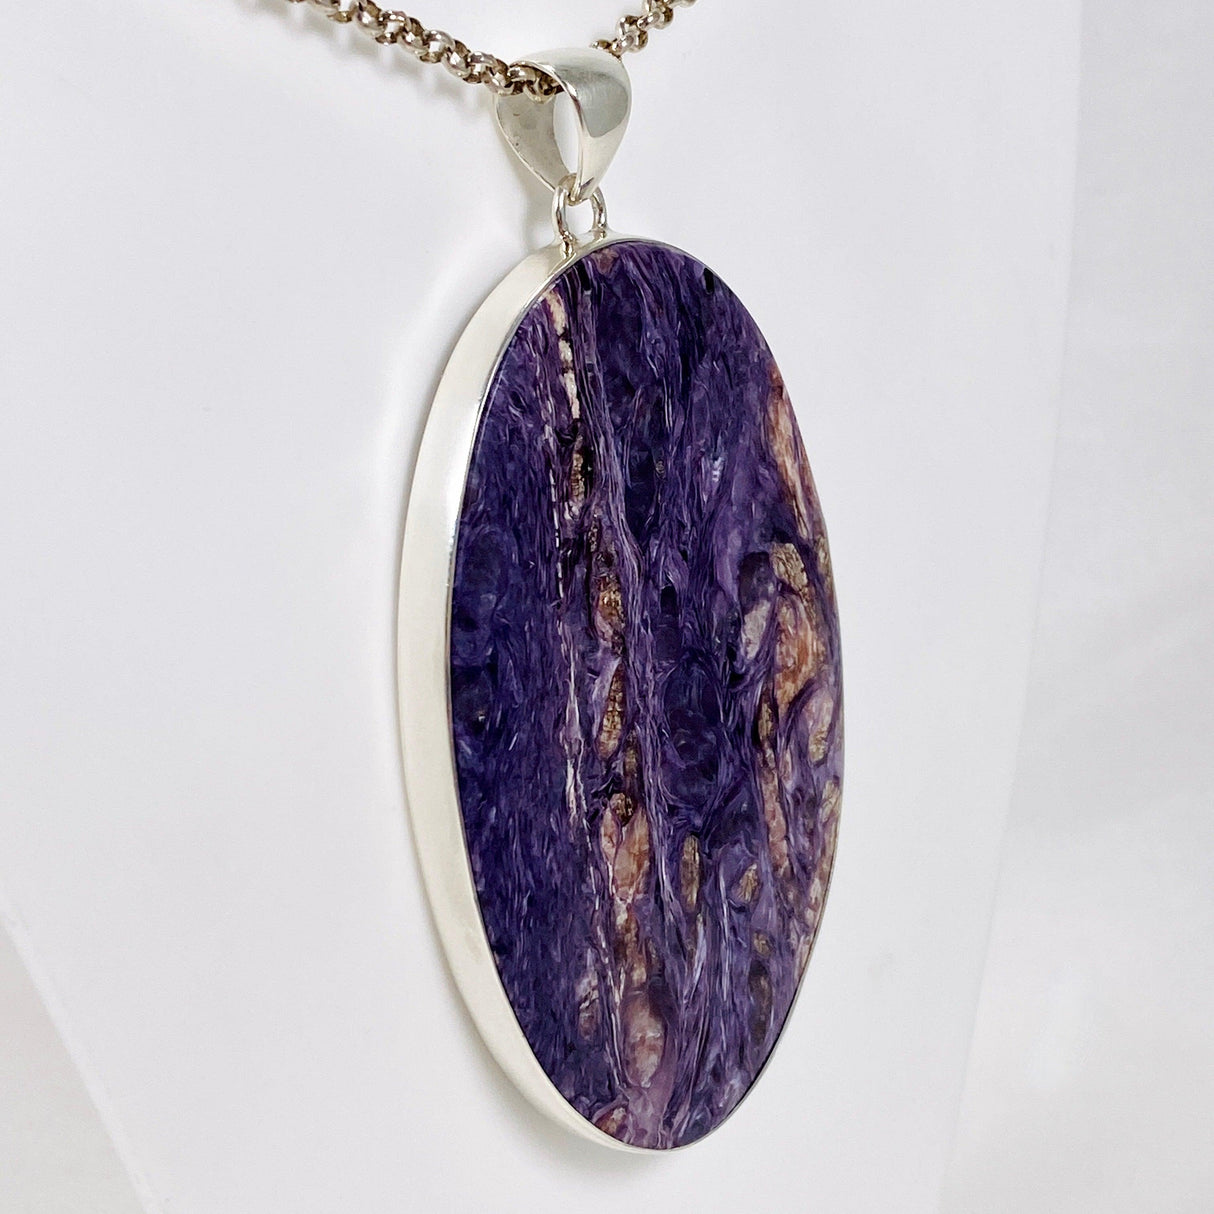 Purple Charoite large oval pendant in sterling silver sitting on a chain